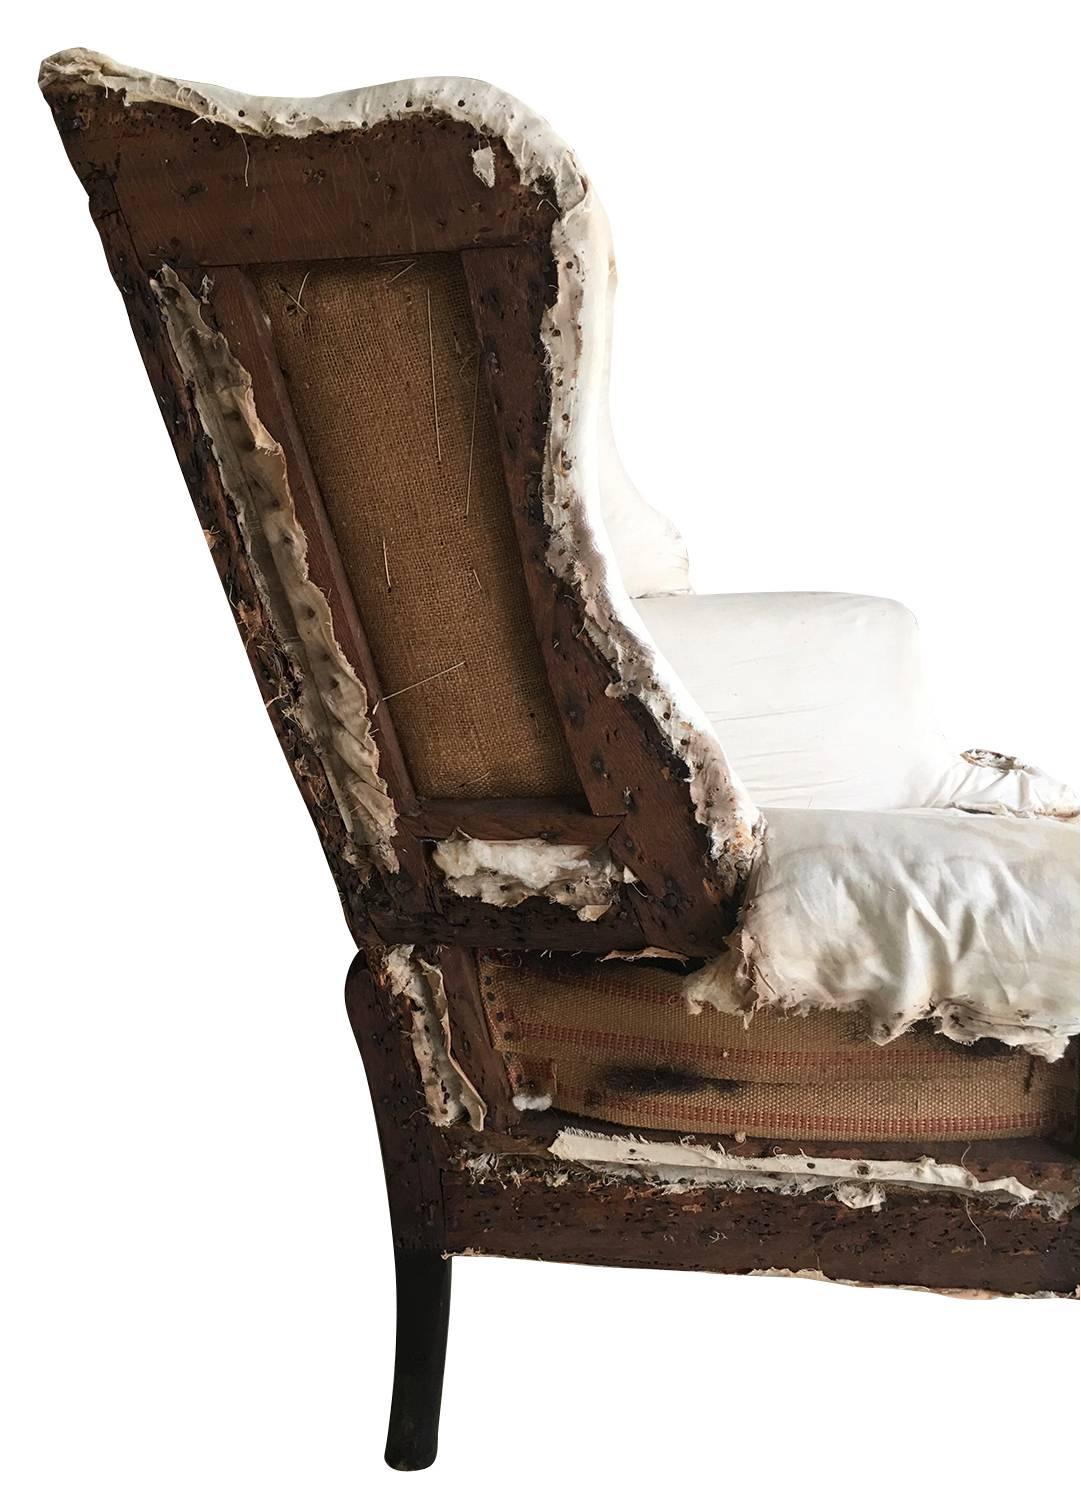 Philadelphia Chippendale carved mahogany easy chair, 1760-1780, having a canted back with slightly serpentine cresting, scroll wings, and upright outward scrolling arms, above a seat with loose cushion over cabriolet legs with ball and claw